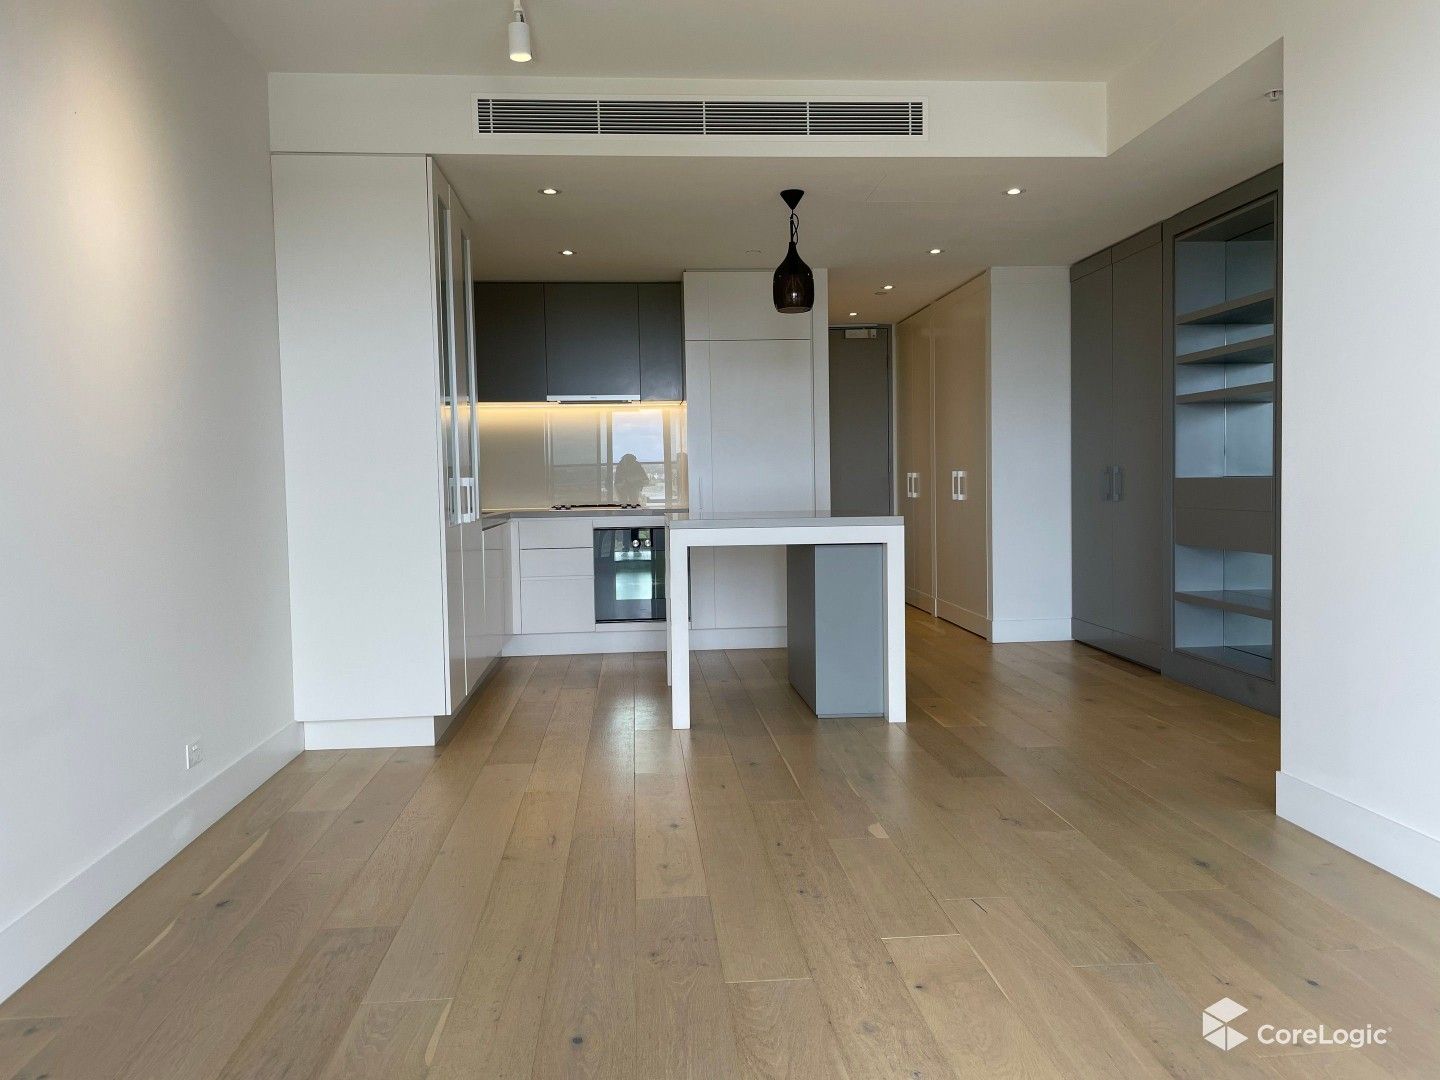 2 bedrooms Apartment / Unit / Flat in 717/1 Dyer Street RICHMOND VIC, 3121